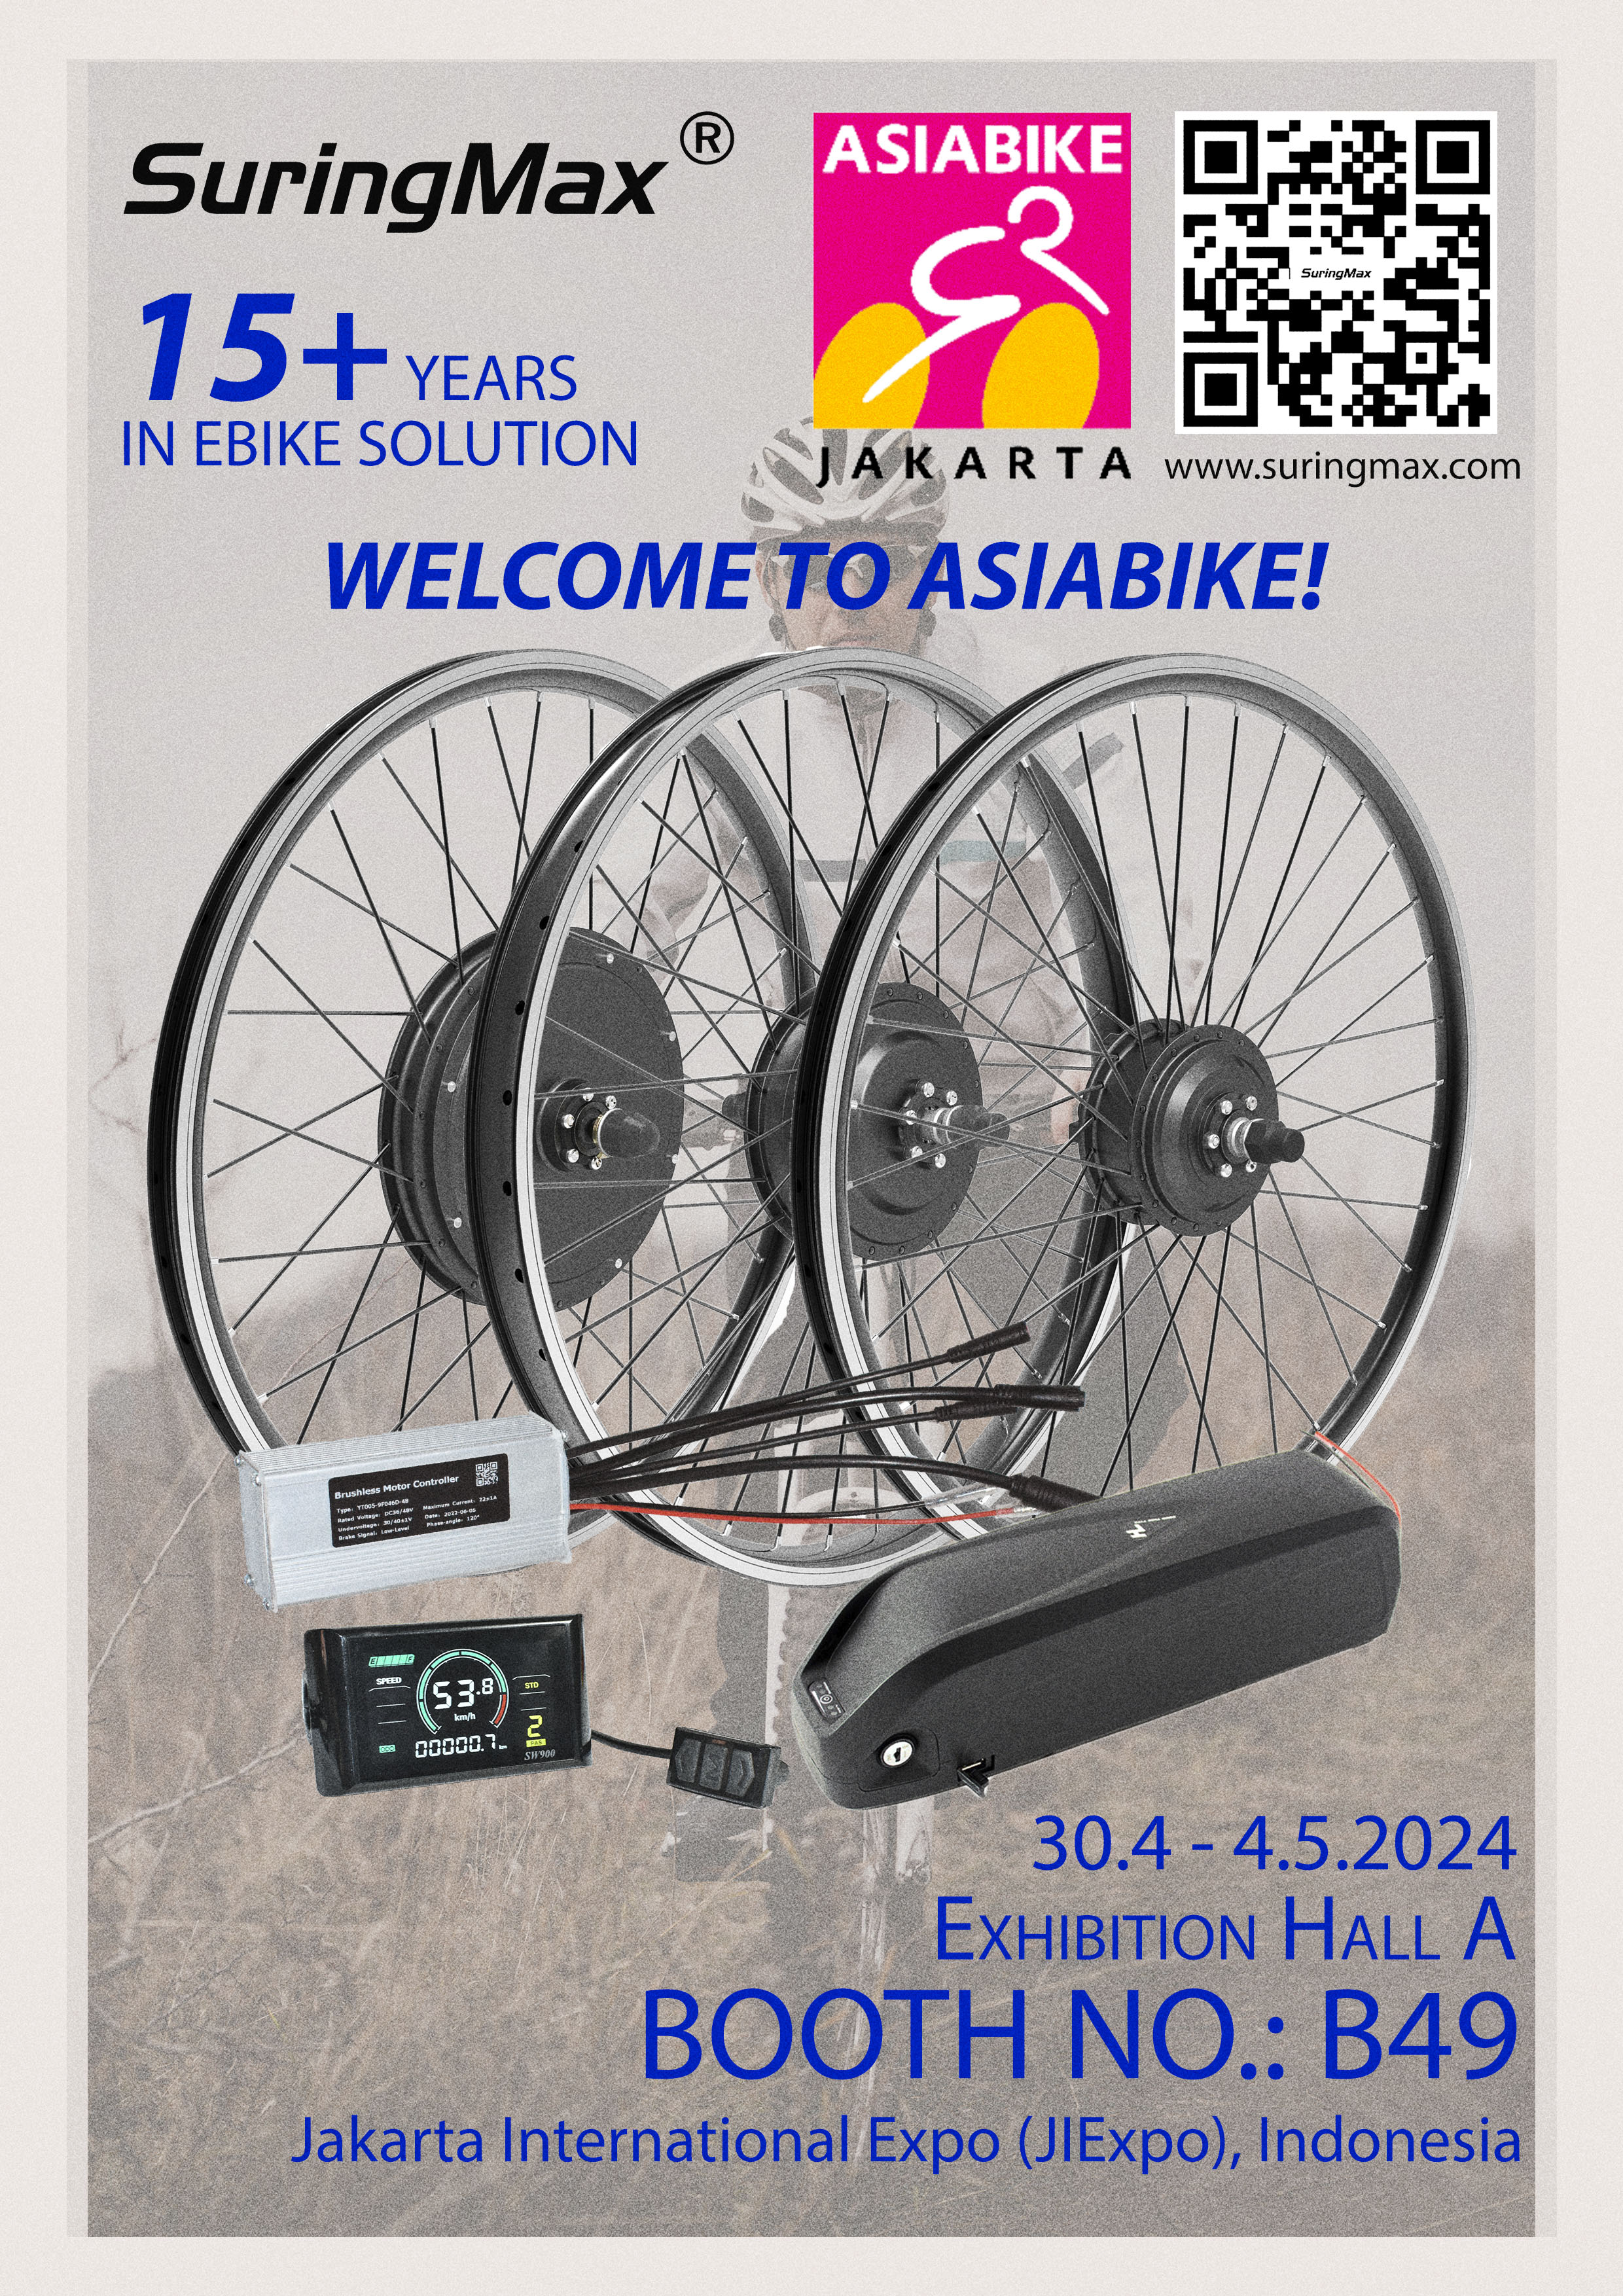 Welcome to ASIABIKE Exhibition 30.4-4.5.2024